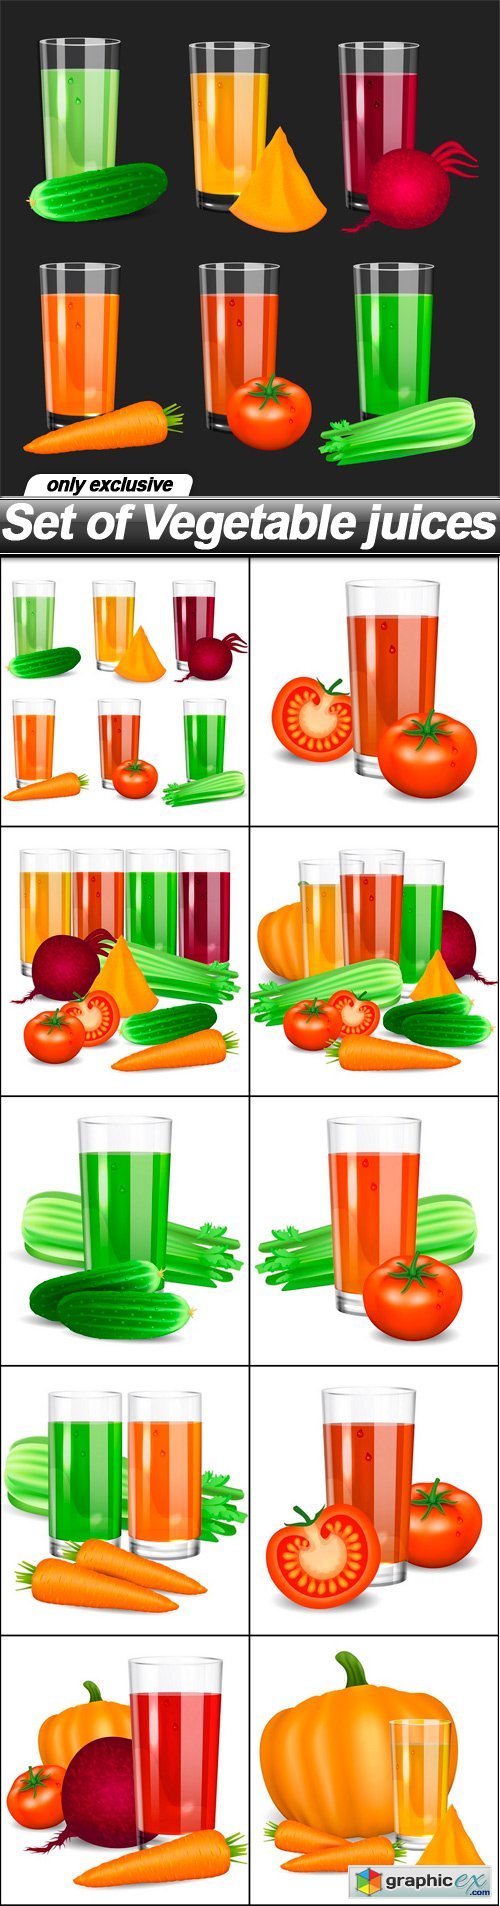 Set of Vegetable juices - 11 EPS